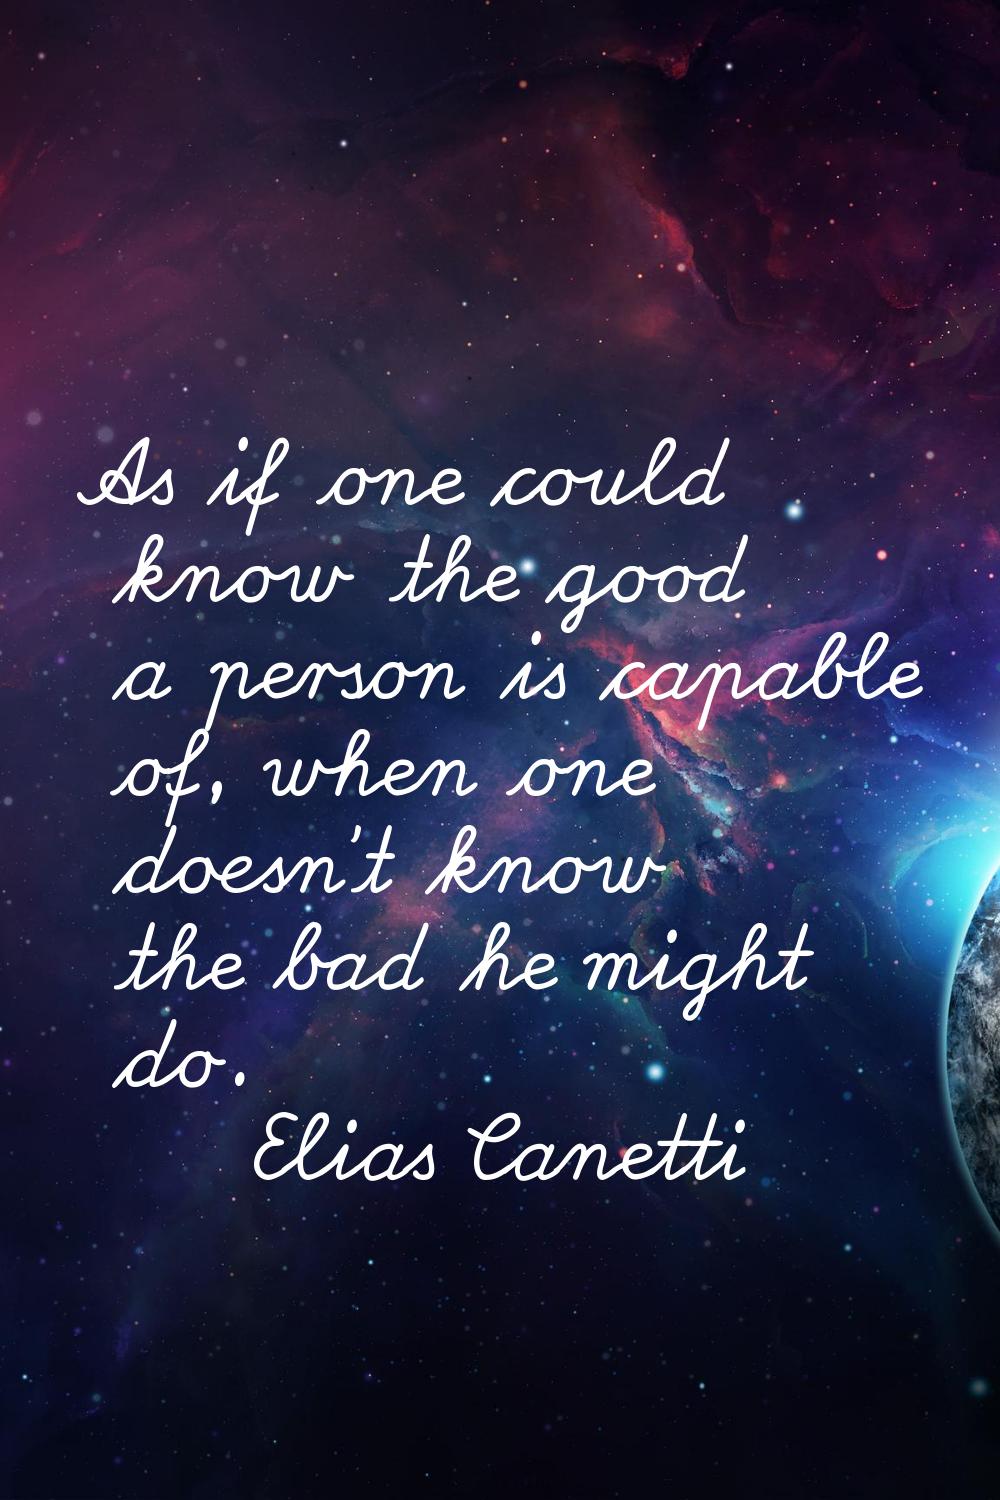 As if one could know the good a person is capable of, when one doesn't know the bad he might do.